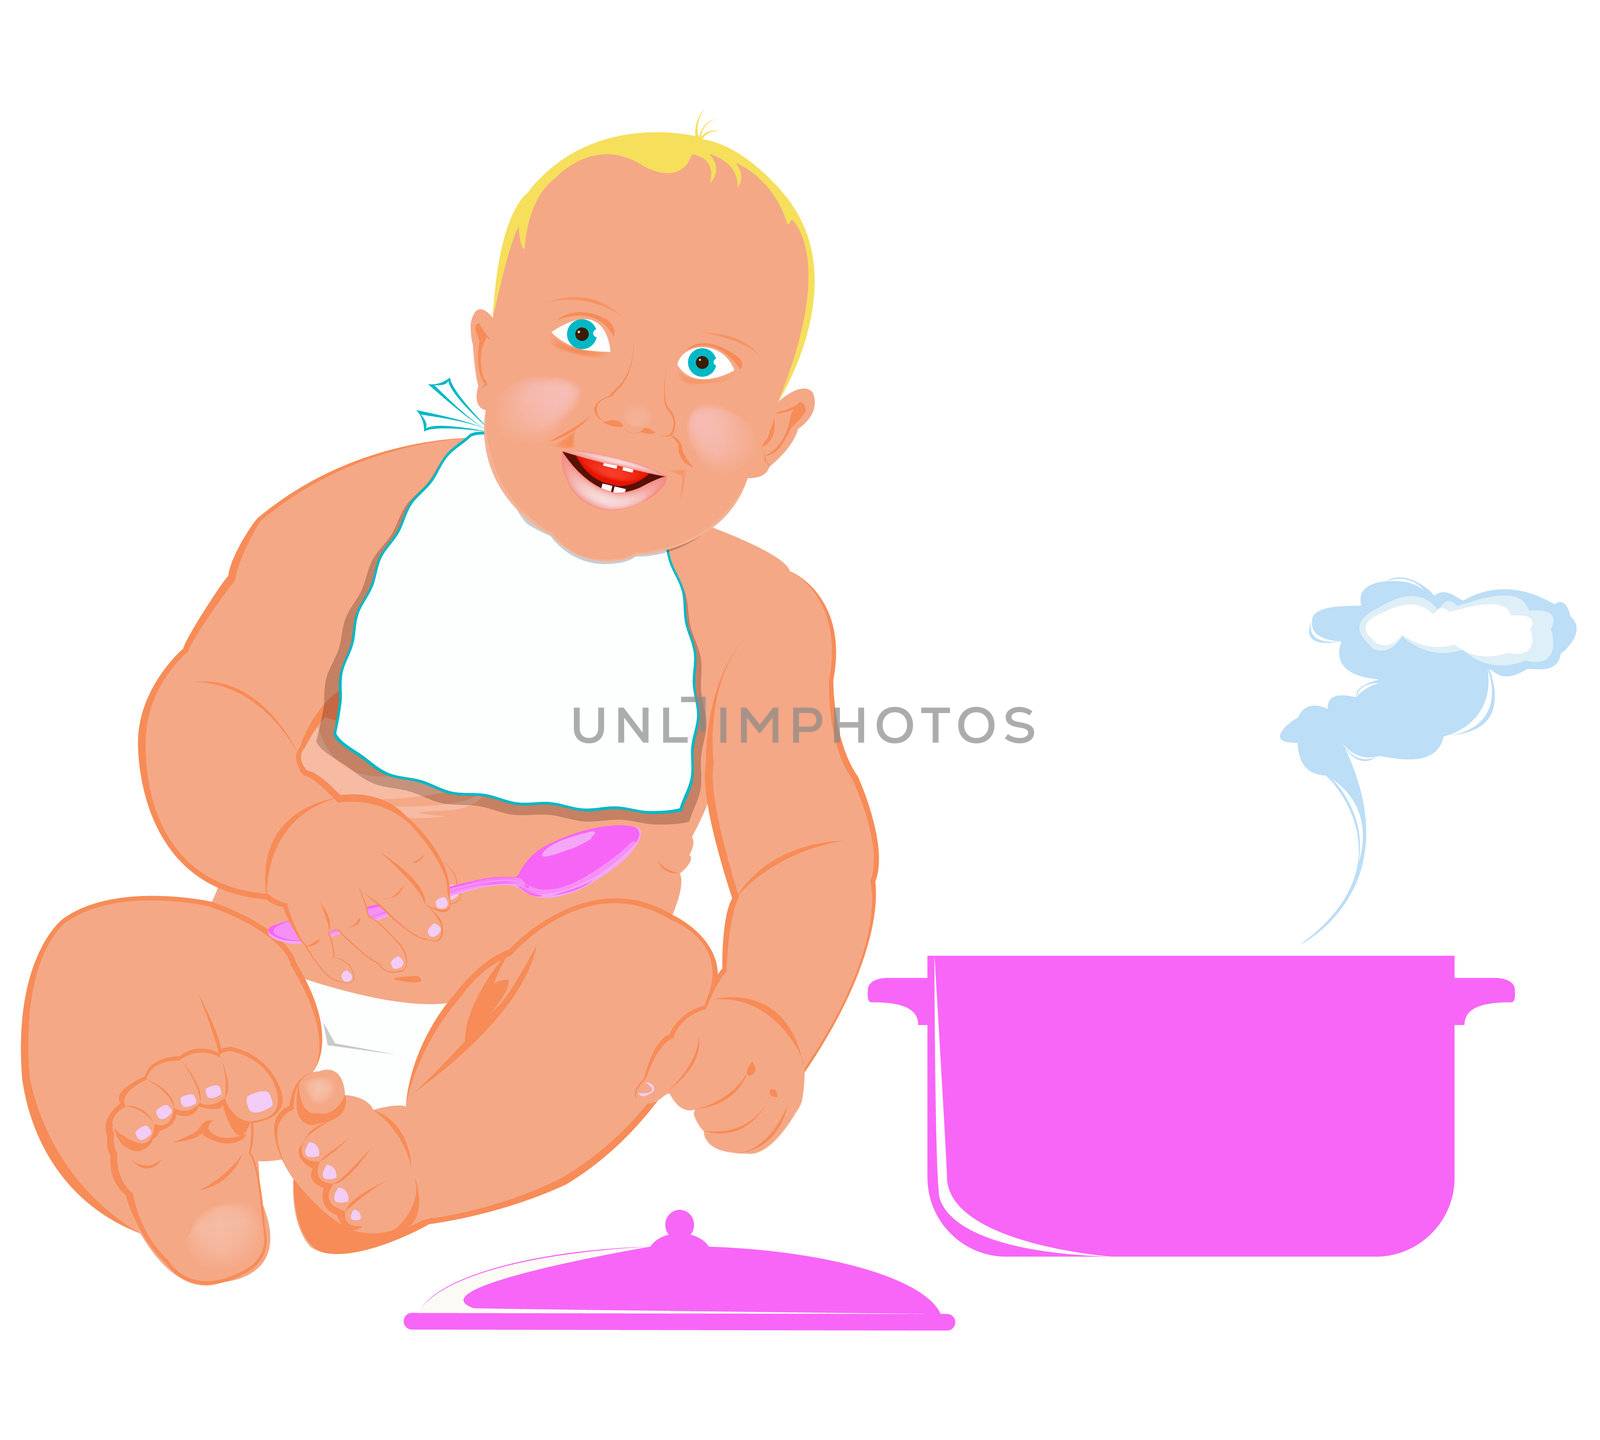 Healthy nutrition food for baby by sergey150770SV